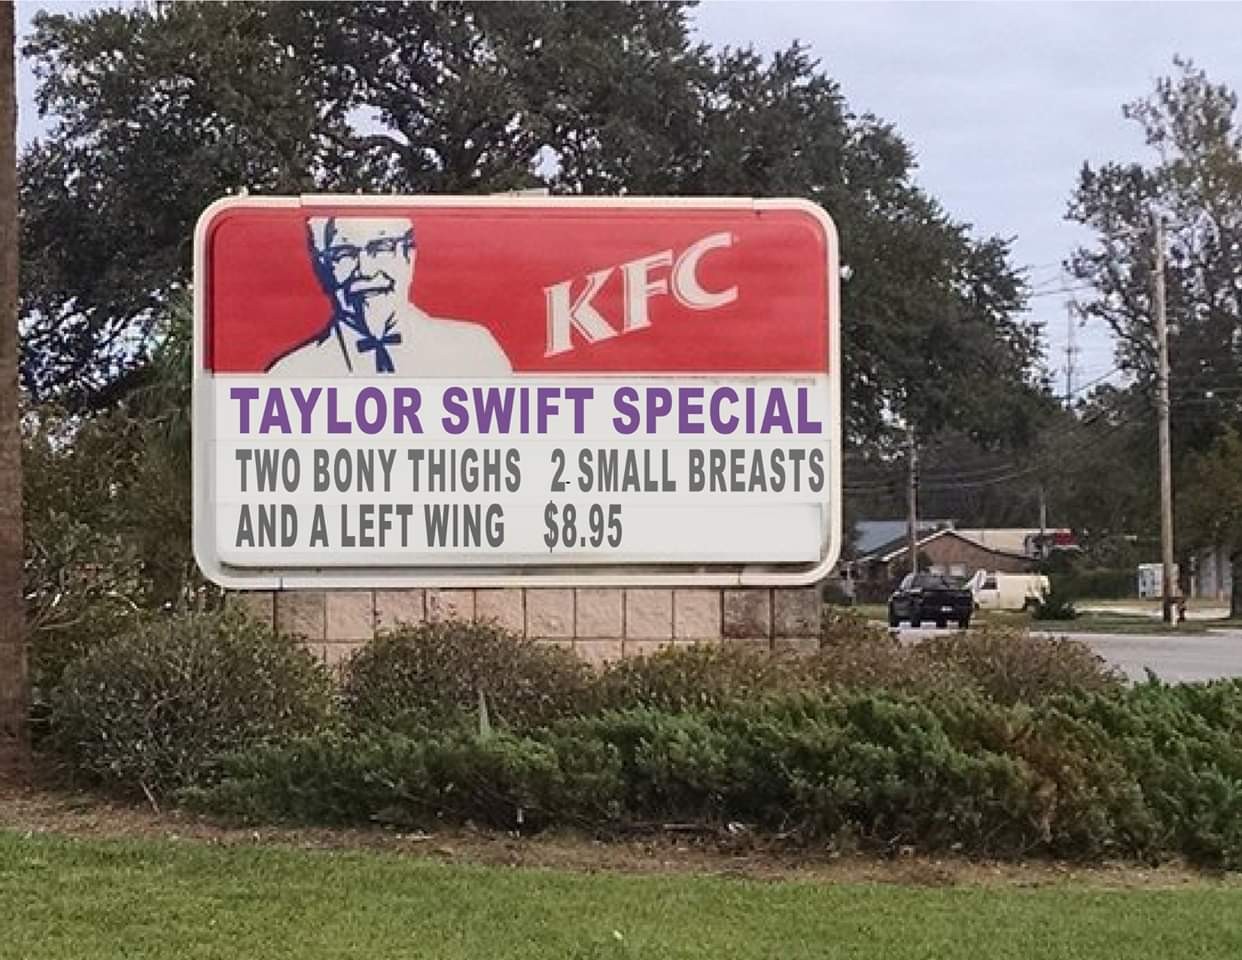 myrtle beach kfc - Kfc Taylor Swift Special Two Bony Thighs 2 Small Breasts And A Left Wing $8.95